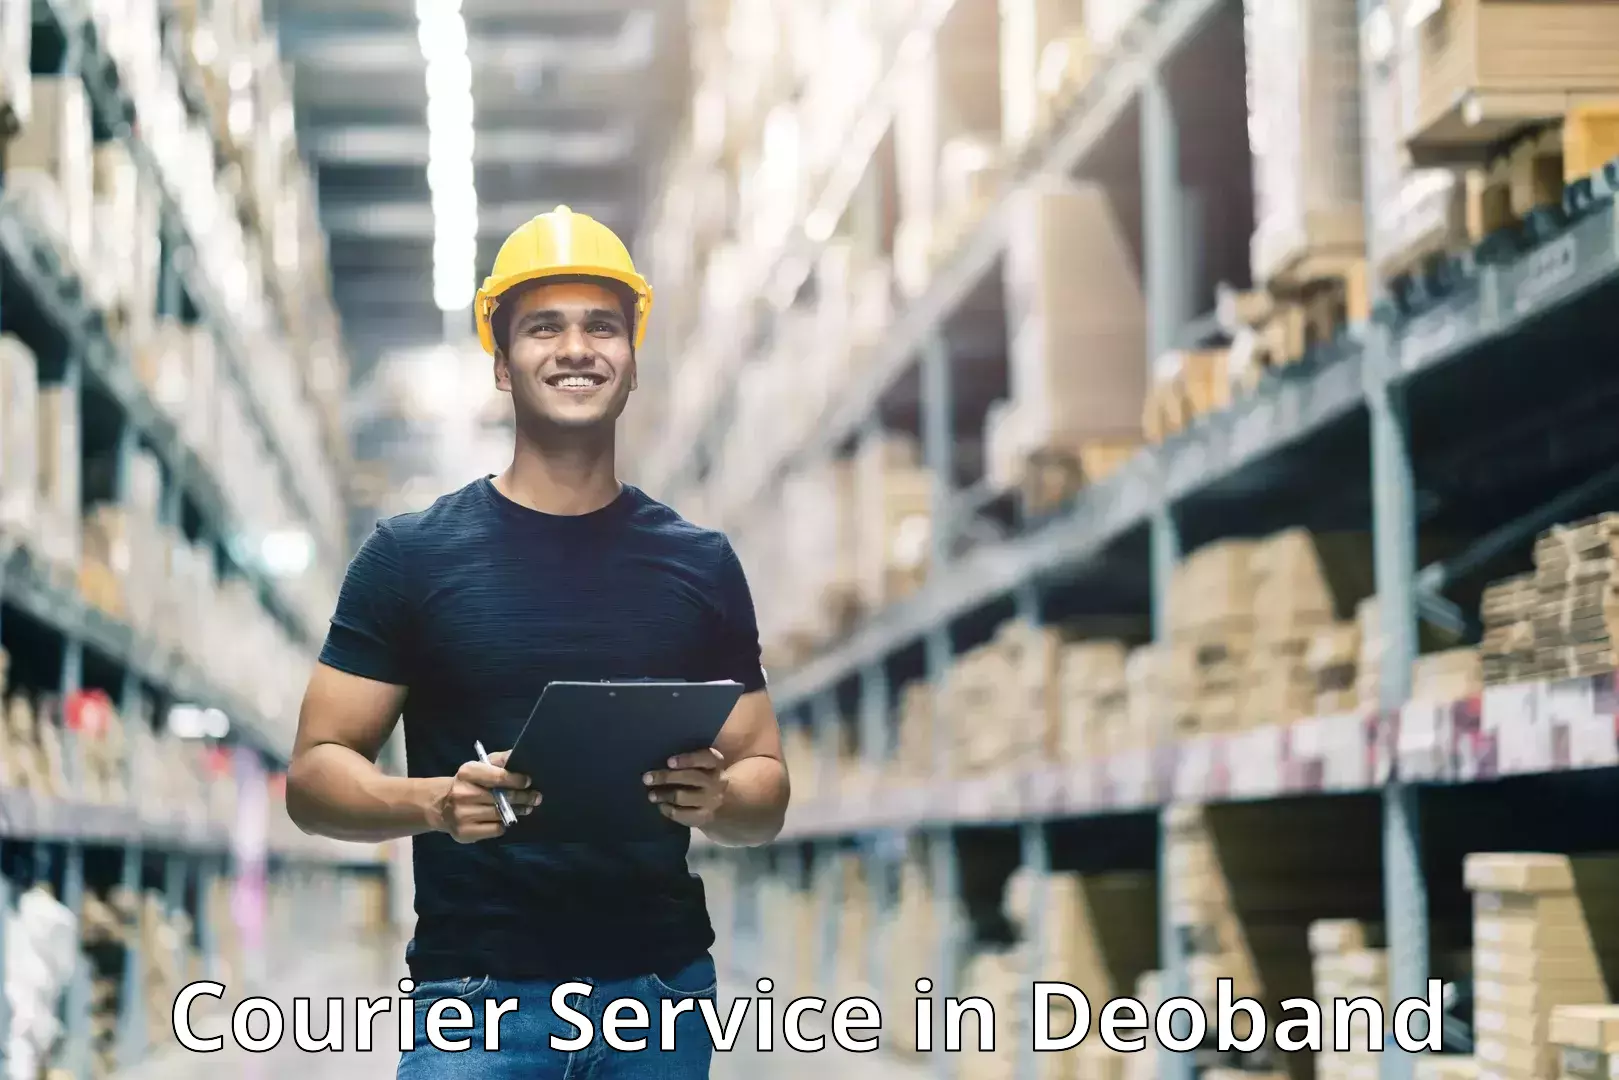 Efficient shipping platforms in Deoband